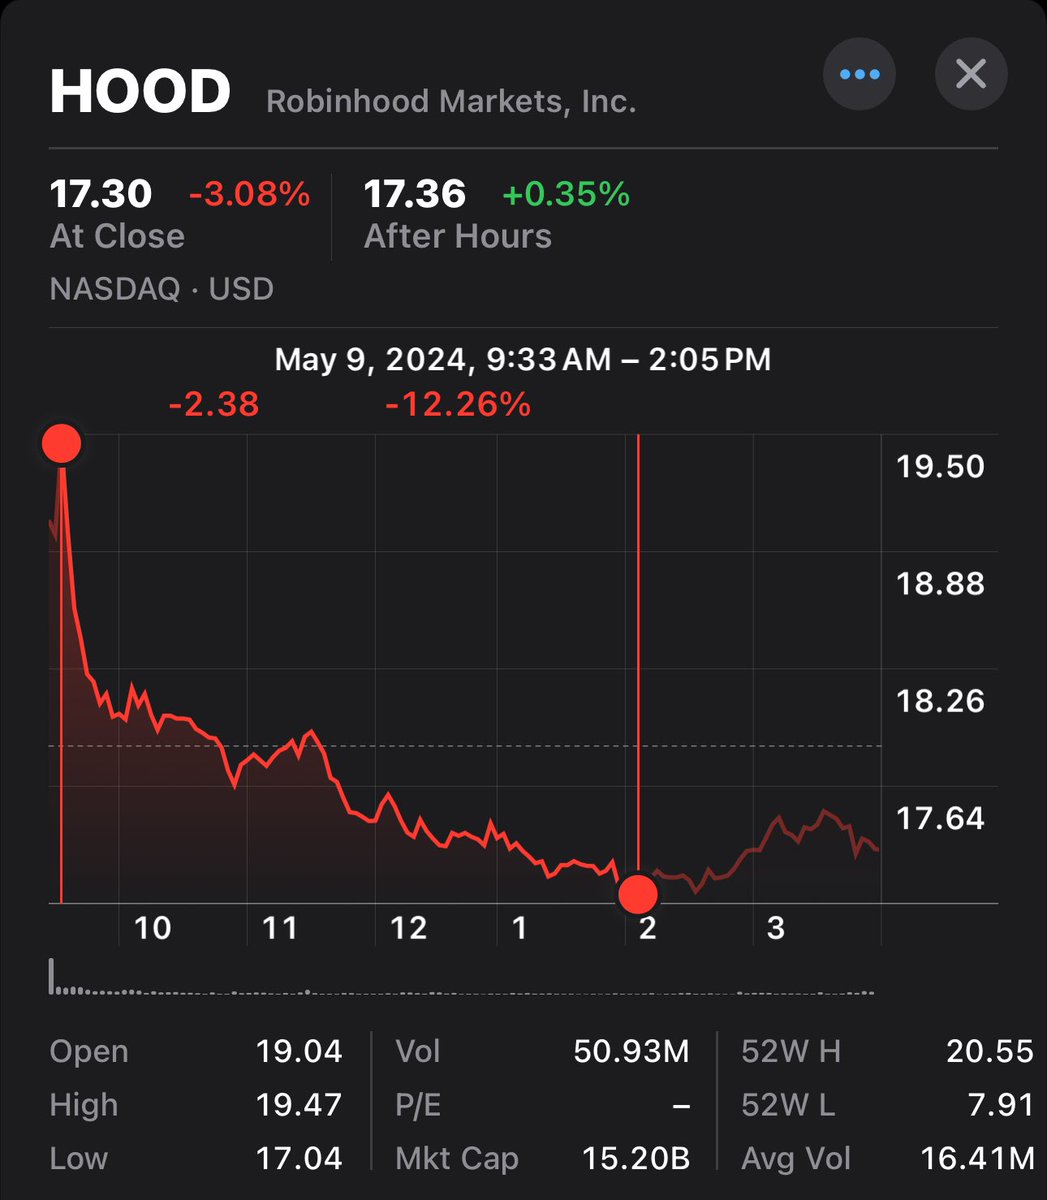 Like $SOFI, $HOOD is a great company that is performing while everyone is terrified. 

In short, they are innovating and executing while Wall Street cowers. 

I sold 1/4 today at that peak. Luck, but planned. Long term, love my holdings. (Never financial advice, only opinions) •